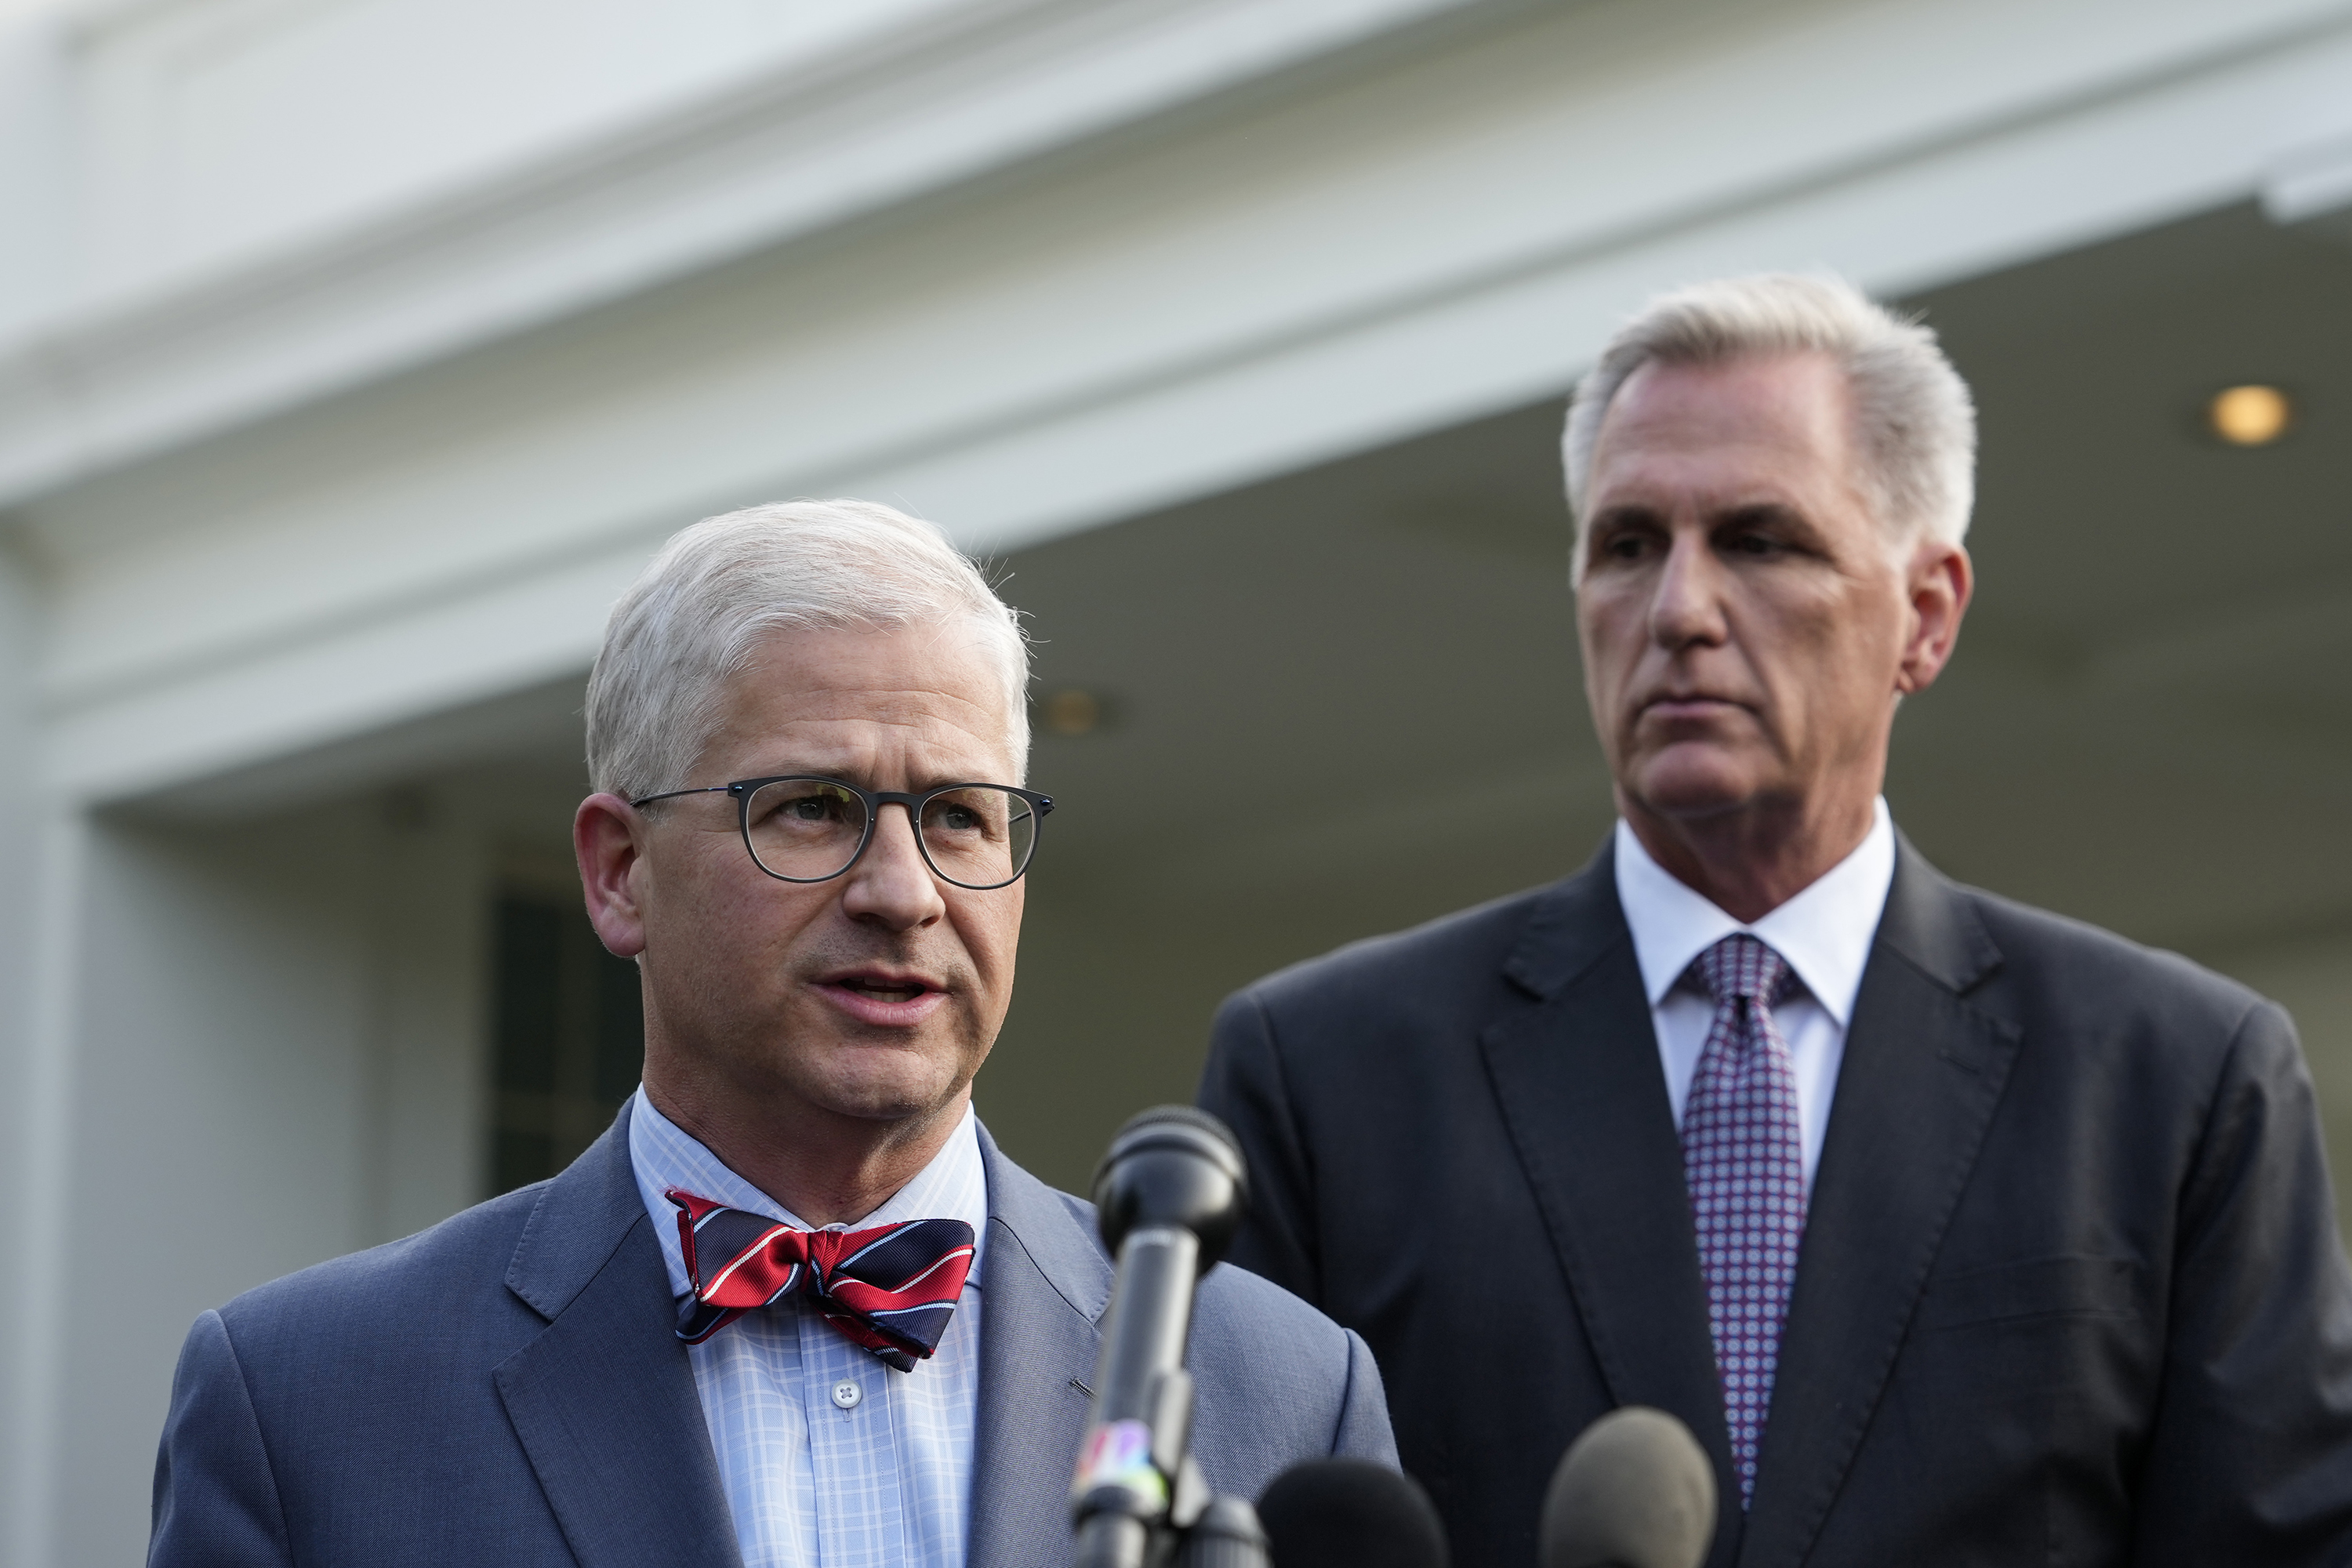 Rep. Patrick McHenry (R-NC), left, and House Speaker Kevin McCarthy (R-CA) talk to reporters outside the West Wing after meeting with President Joe Biden in the Oval Office of the White House on May 22.